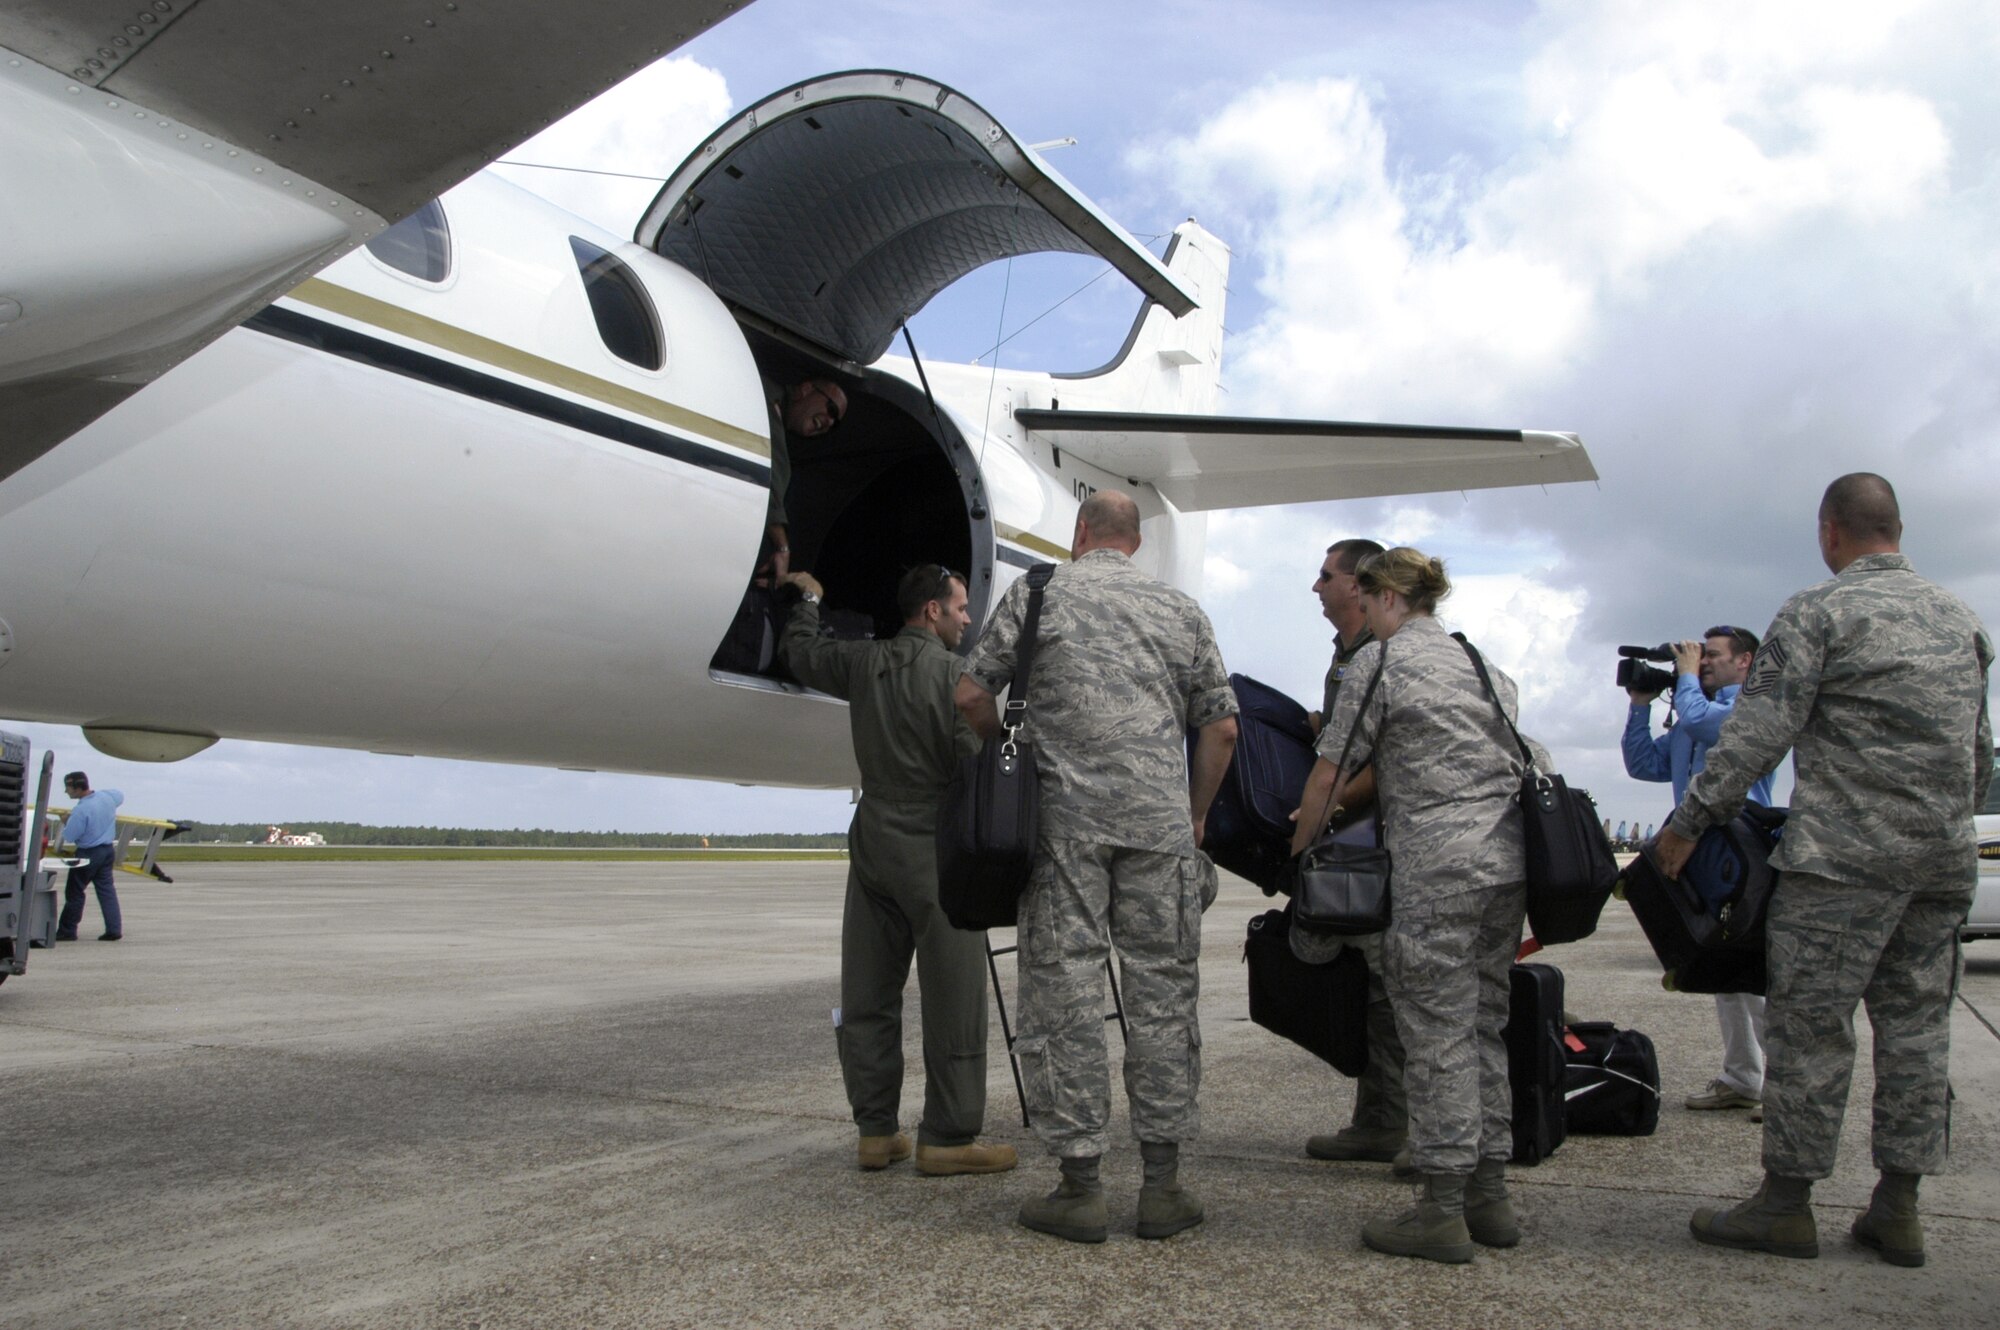 Members of the AFNORTH ACCE team stow their cargo prior to the team’s deployment in support of anticipated relief efforts for Hurricane Ike.  The Air Component Coordination Element is a group of Air Force subject matter experts that coordinates the movement of Air Force assets into stricken regions during natural disasters or other contingencies.  The team also supports state and federal evacuation, humanitarian relief and search and rescue missions. (U.S. Air Force photo by Master Sgt. Jerry Harlan)